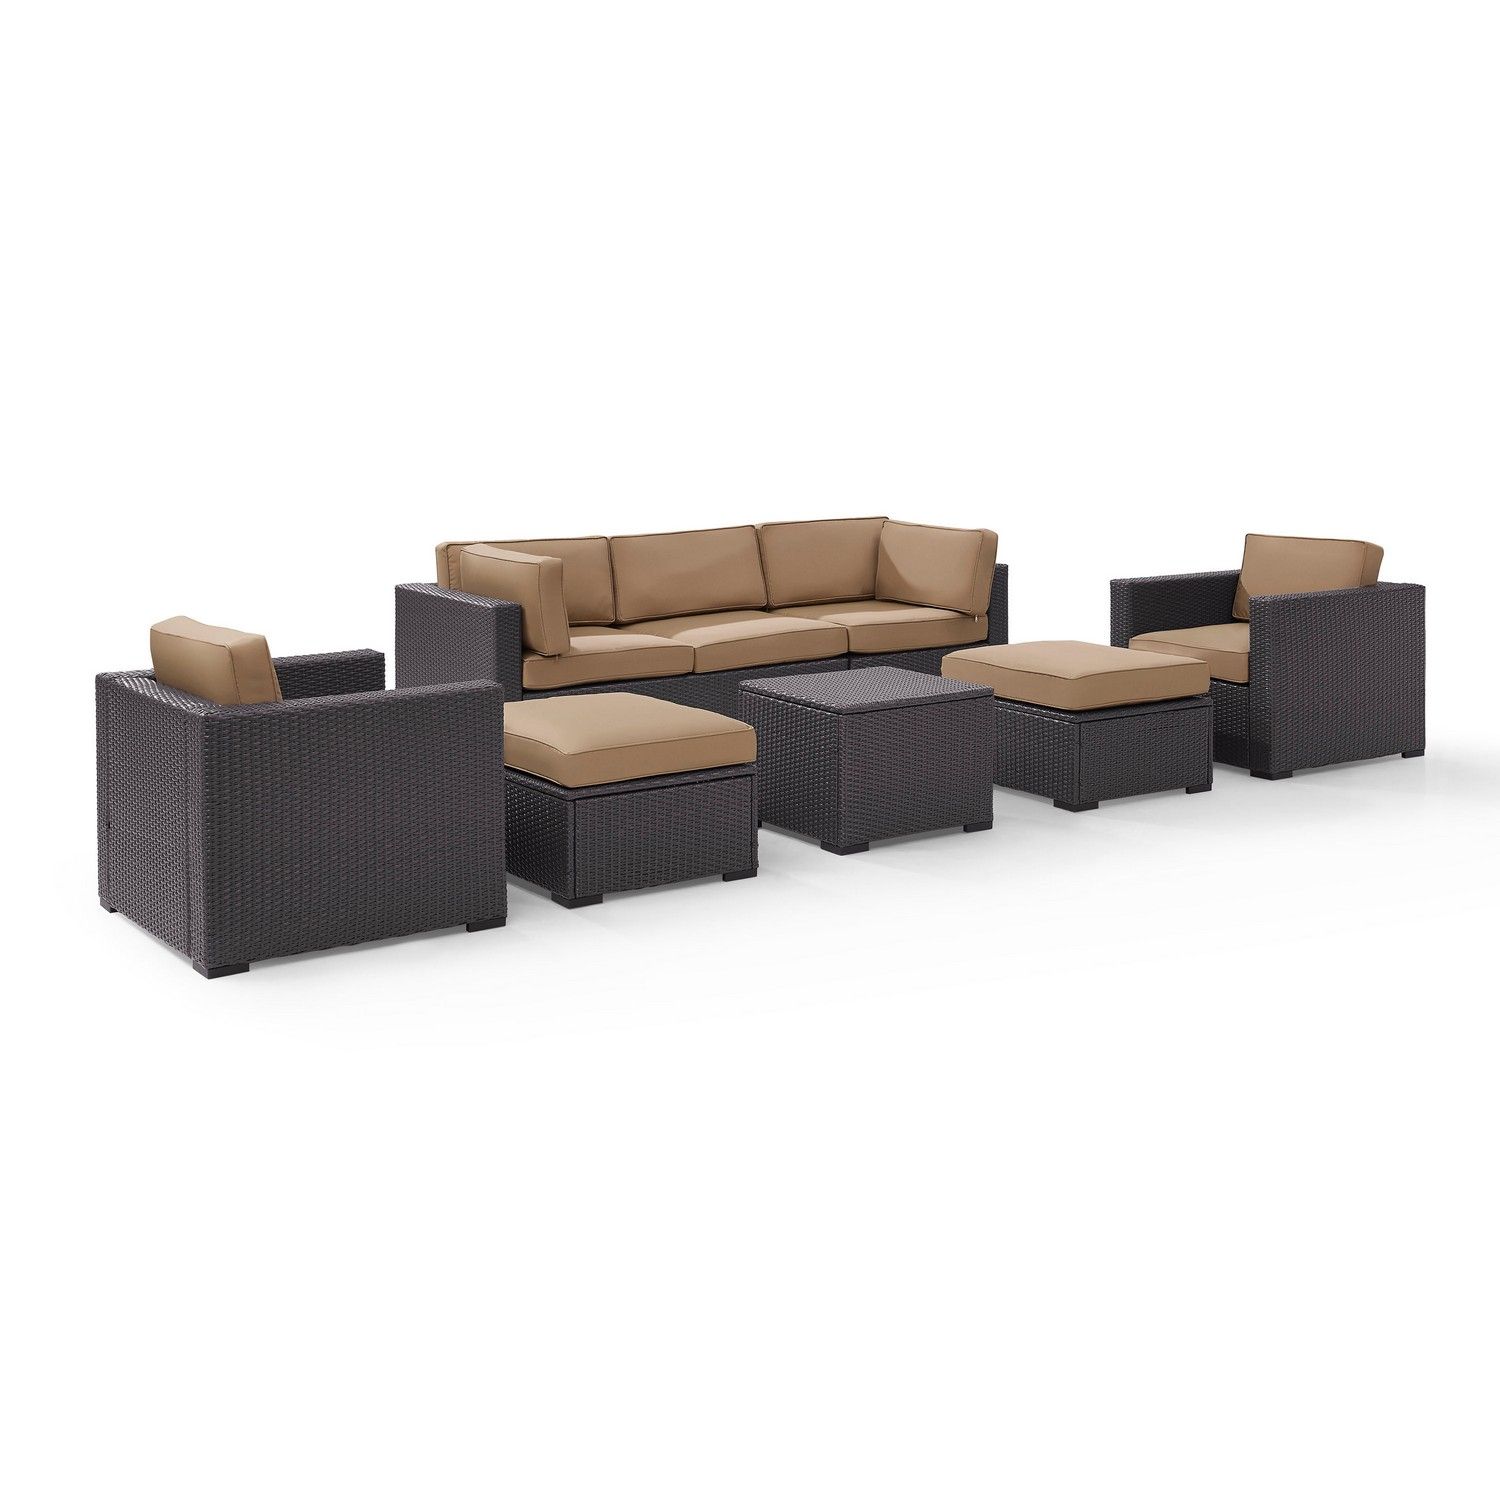 Crosley Biscayne 7-PC Outdoor Wicker Sectional Set - Loveseat, 2 Arm Chairs, Corner Chair, Coffee Table, 2 Ottomans - Mocha/Brown